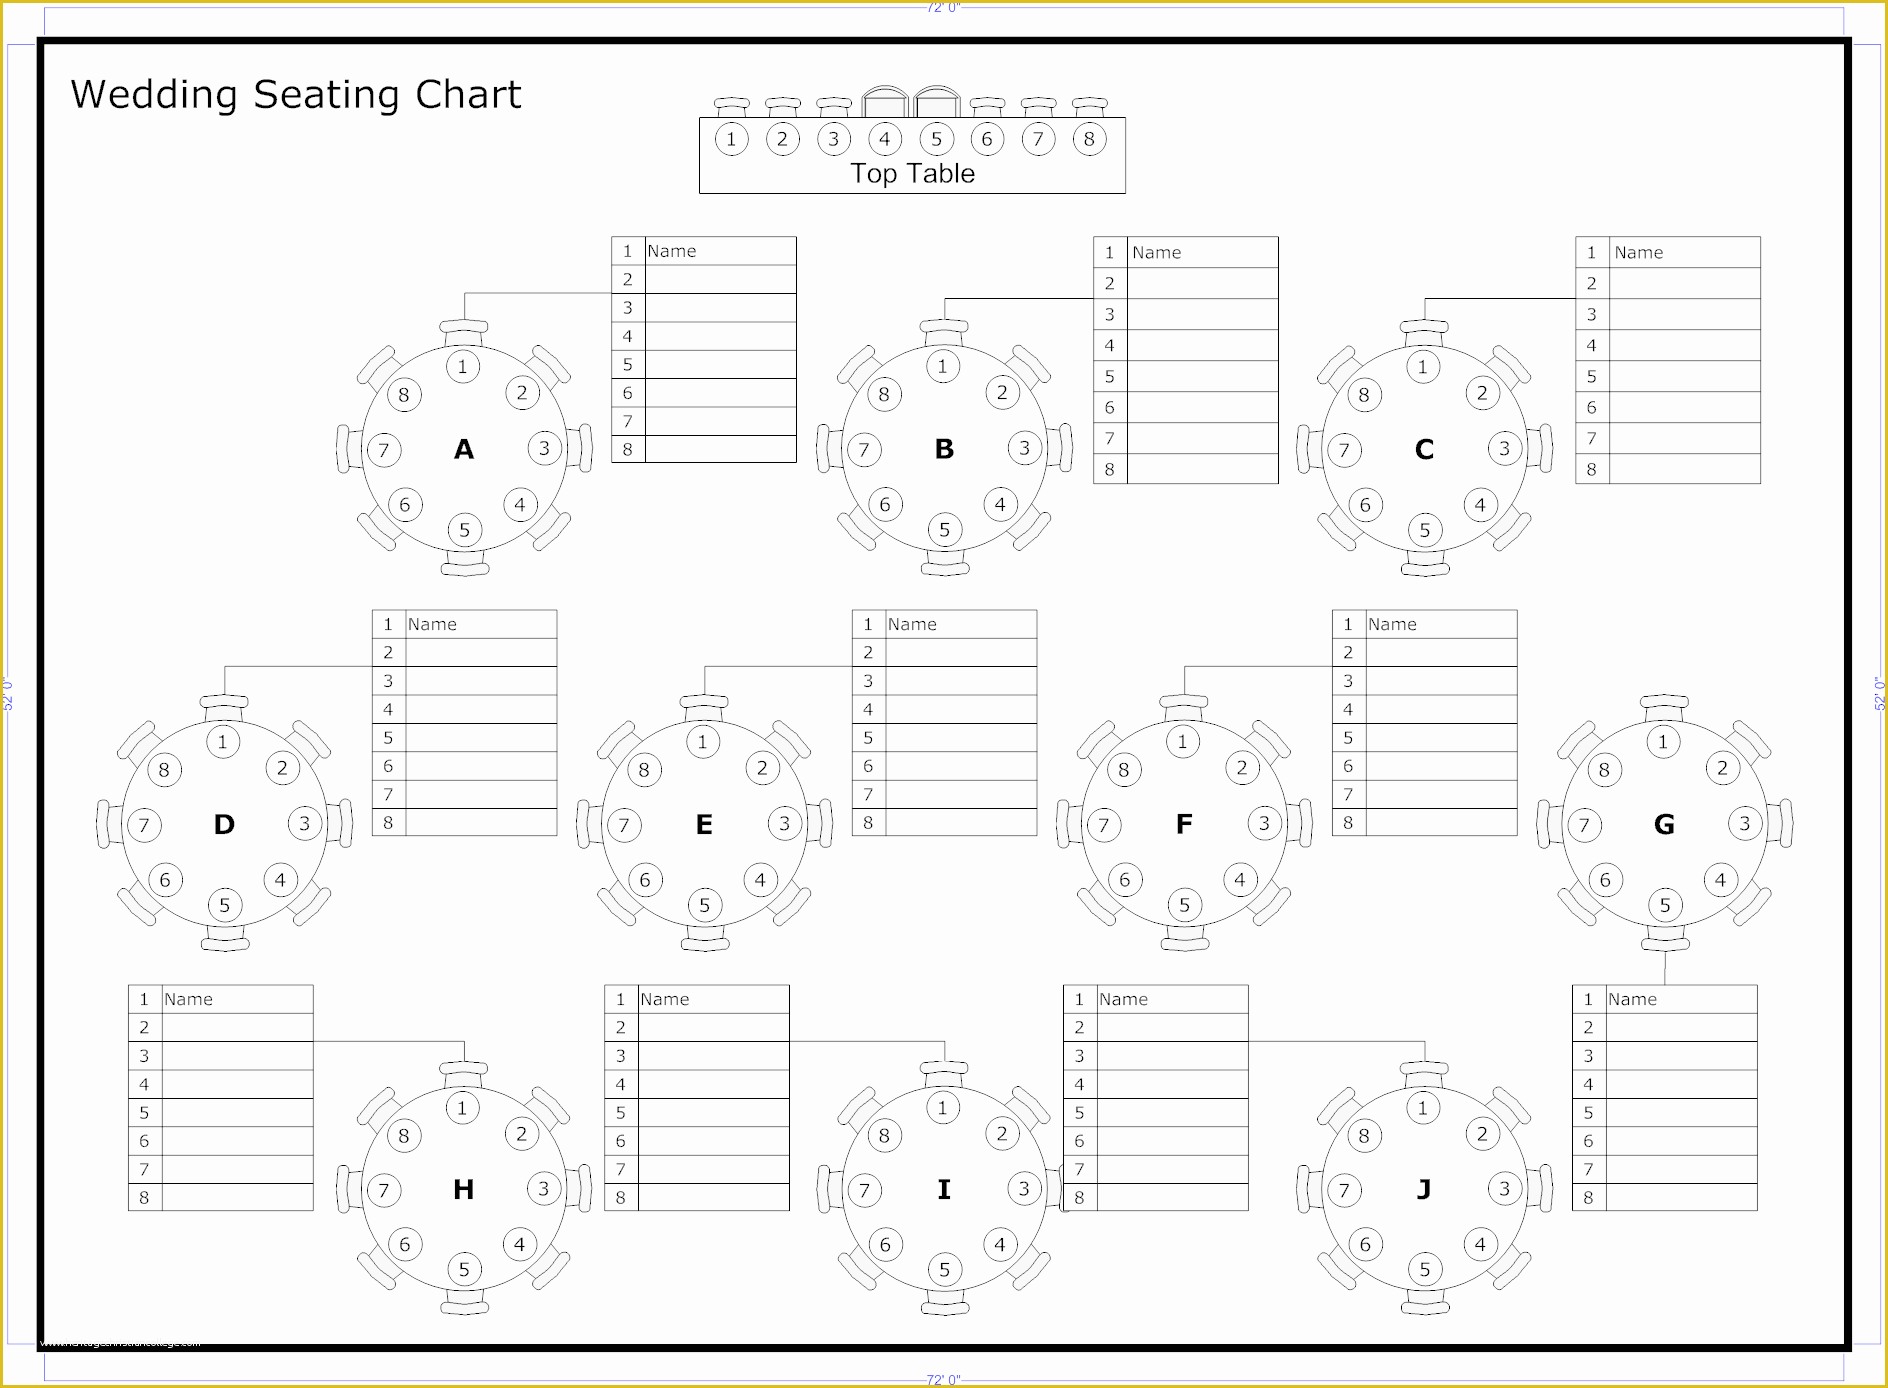 Free Wedding Floor Plan Template Of Tips to Seat Your Wedding Guests